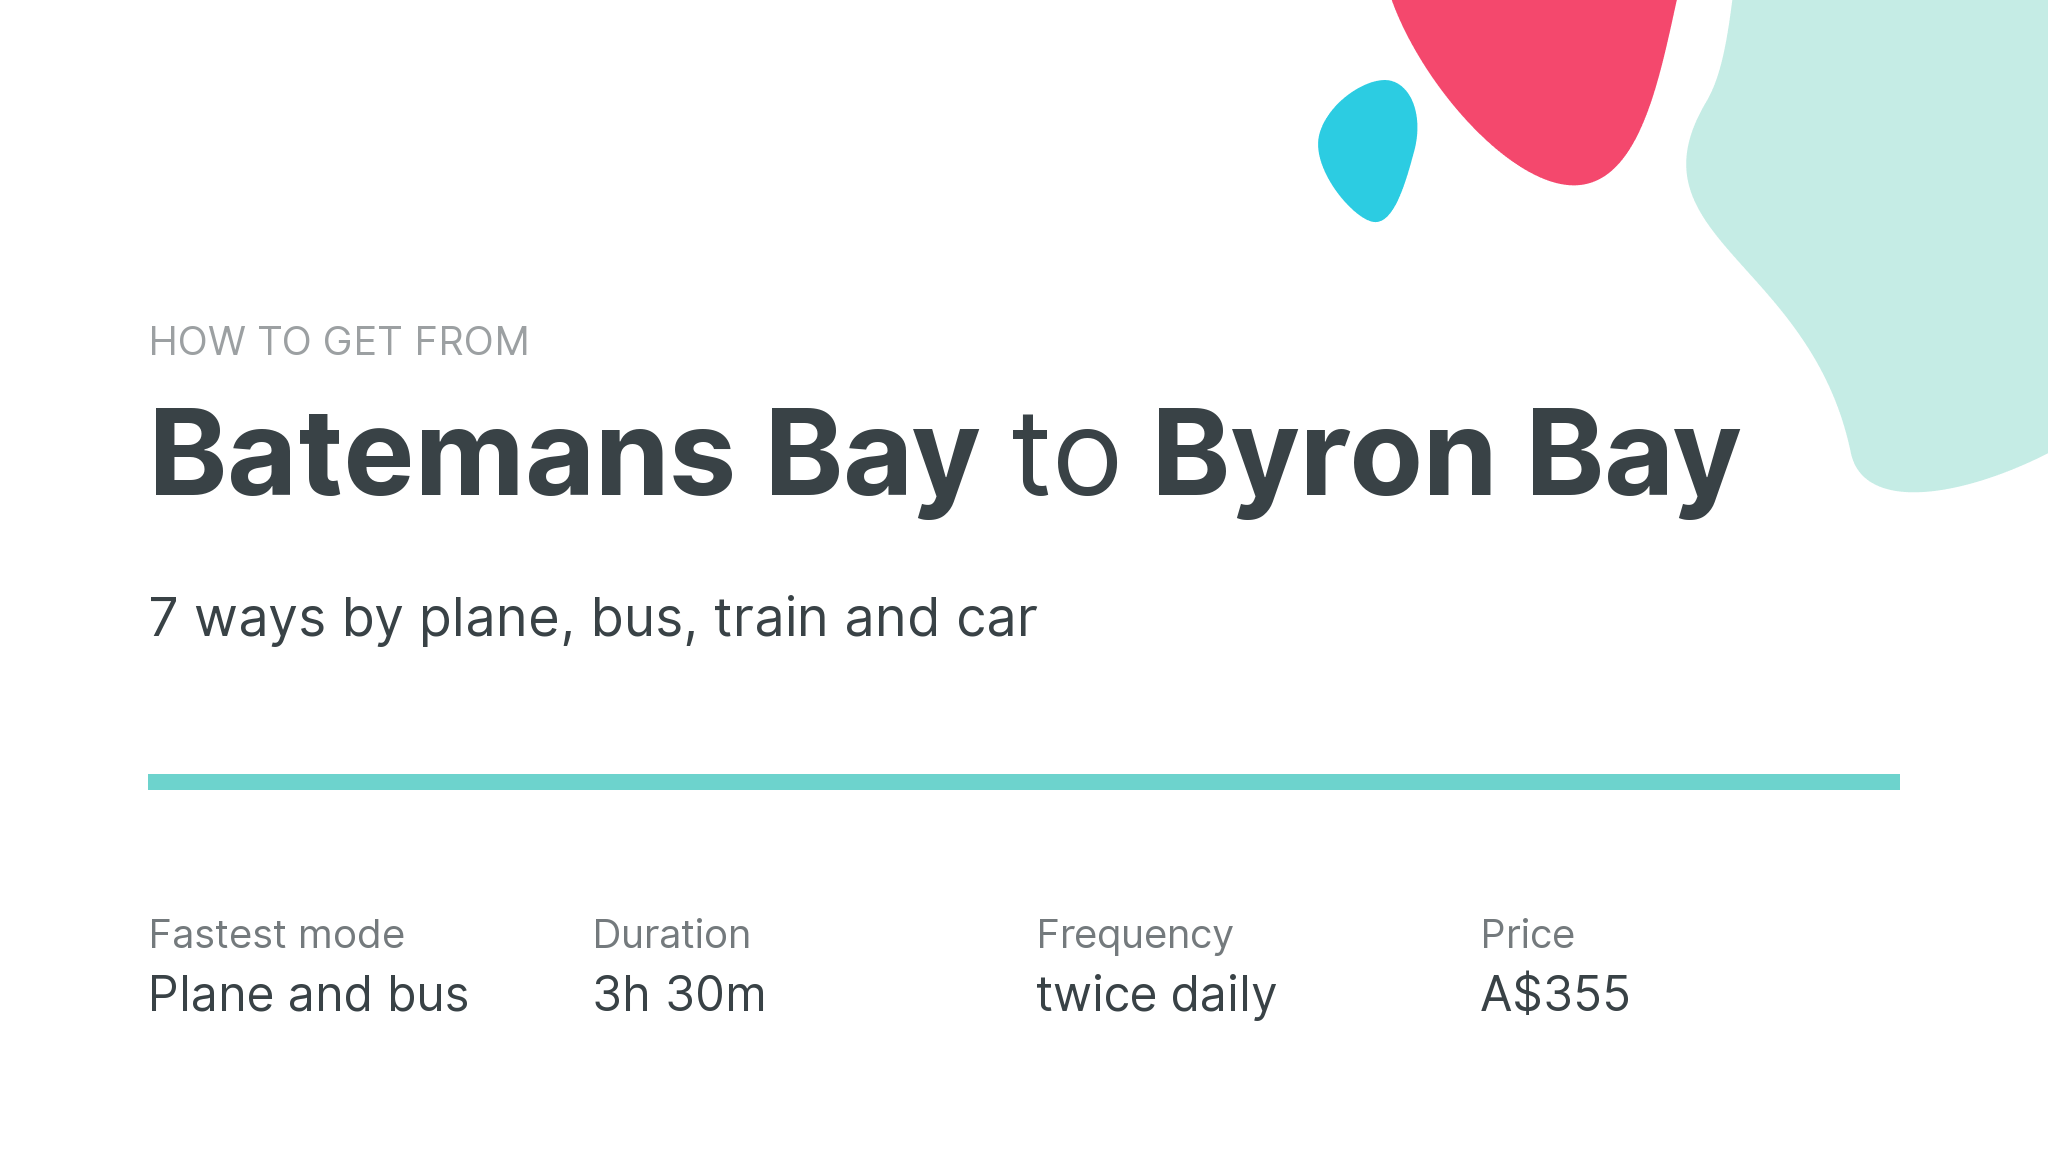 How do I get from Batemans Bay to Byron Bay